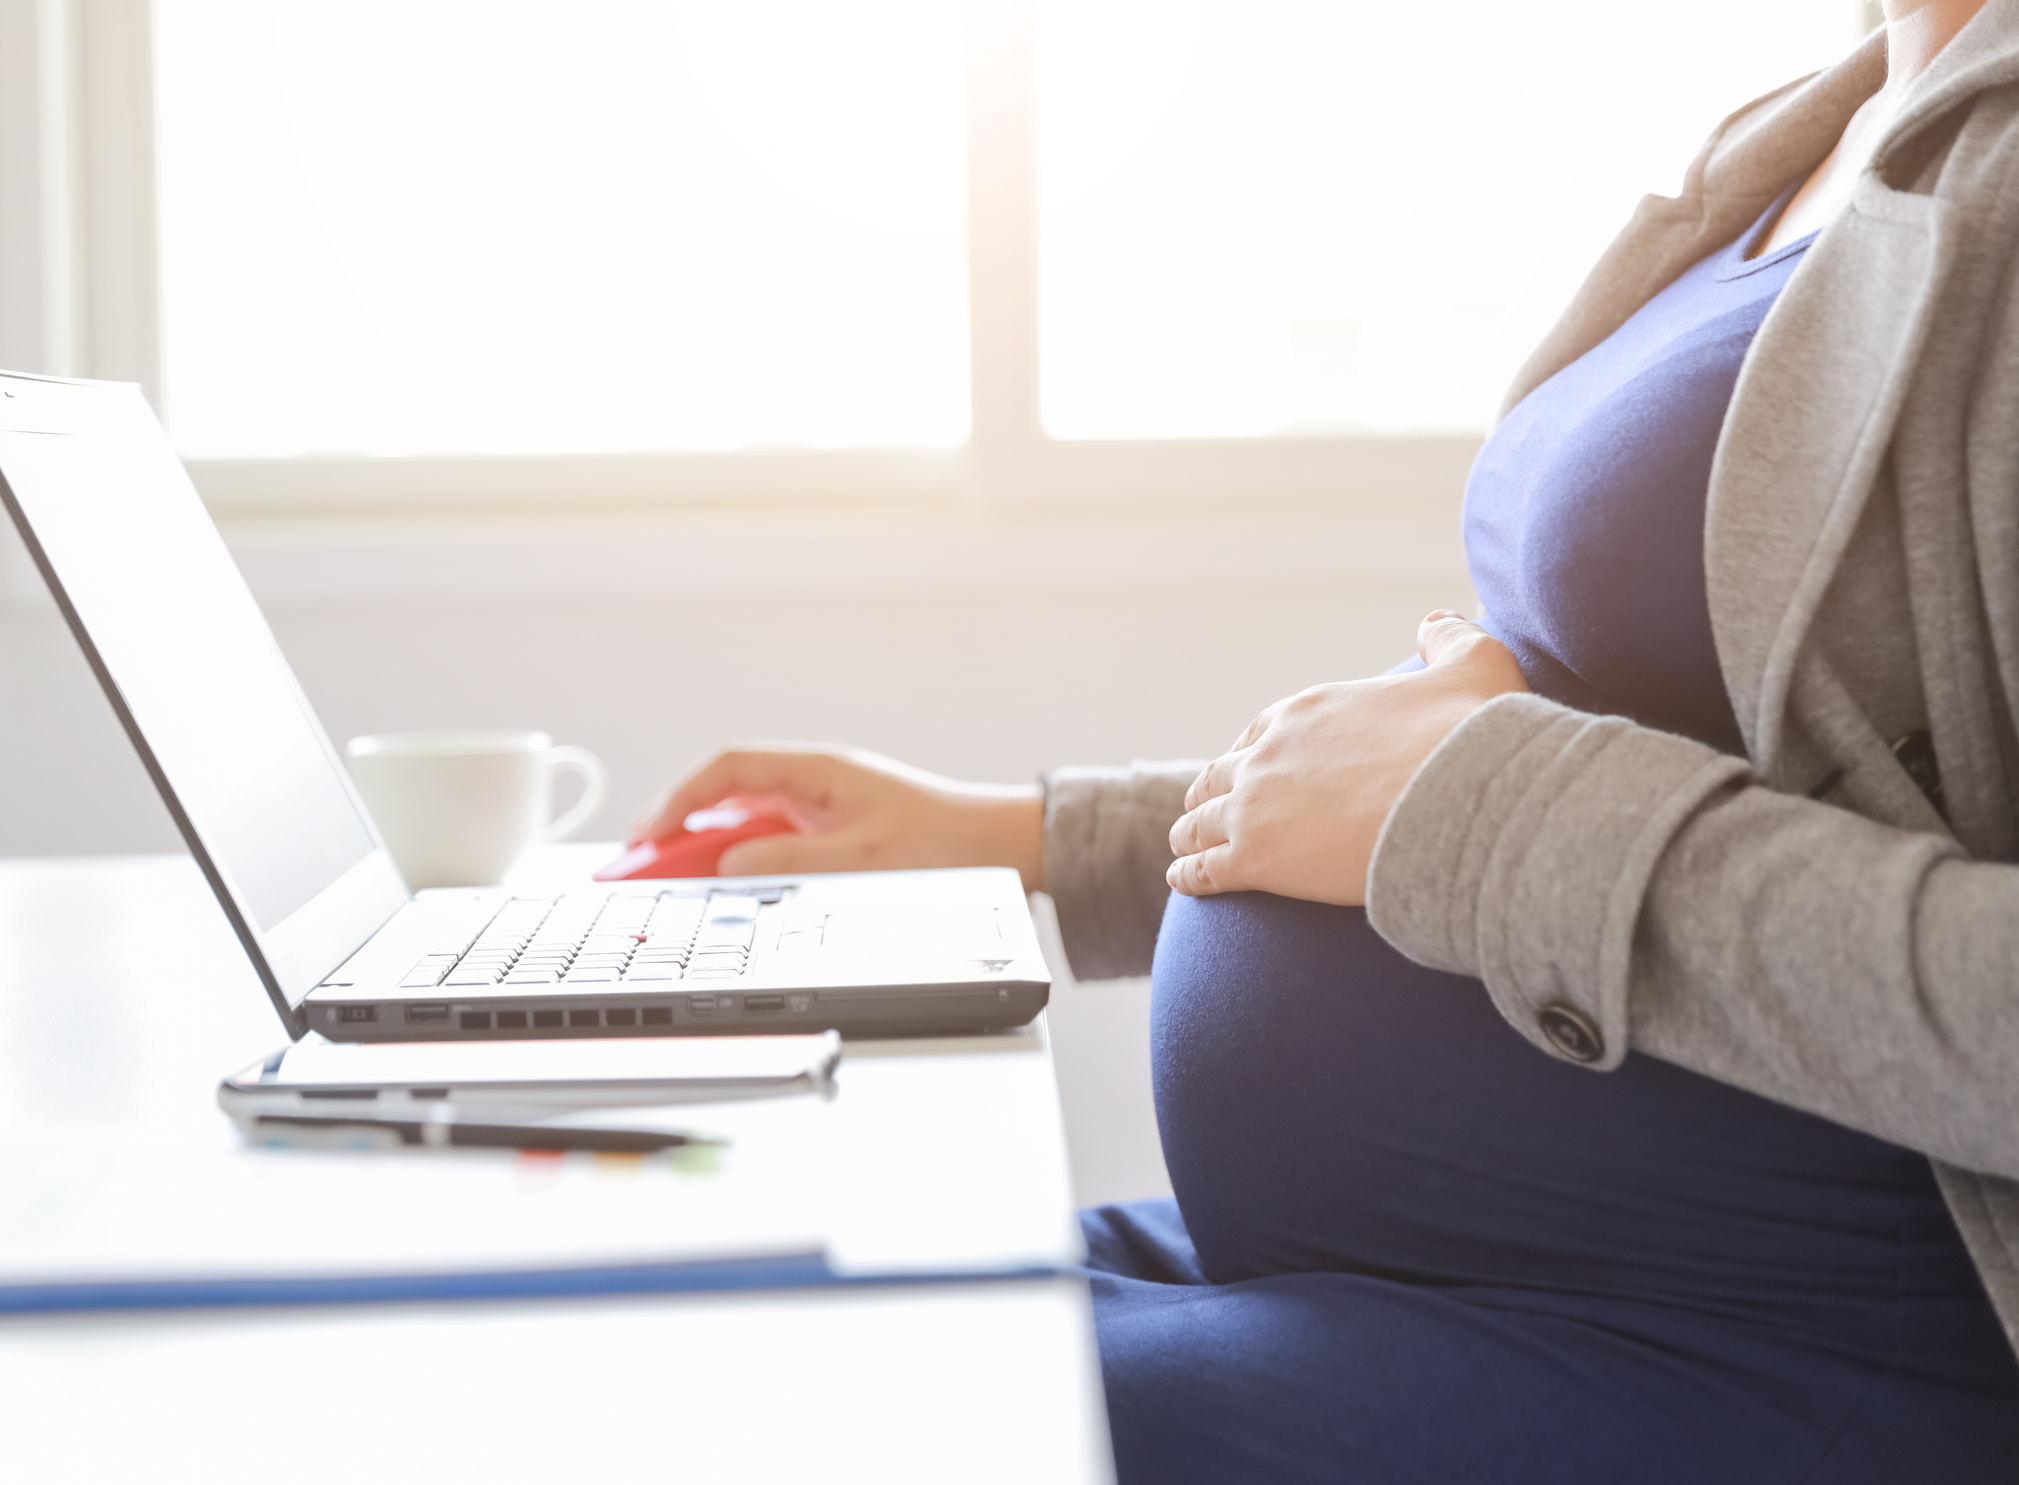 pregnant woman is working on computer laptop and mobile phone, business